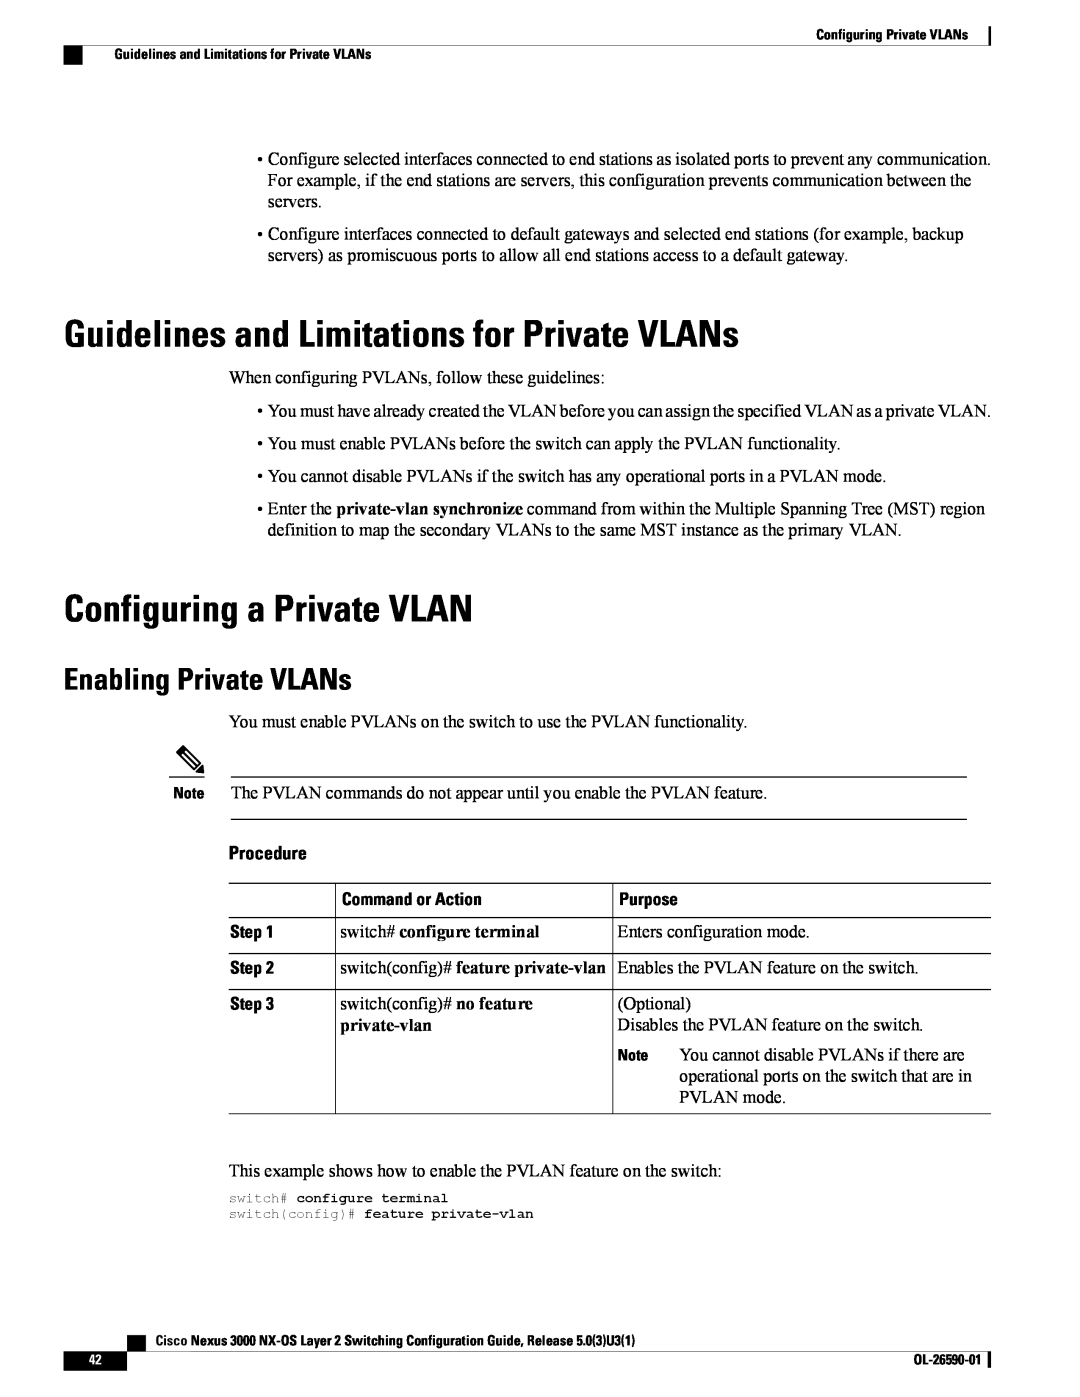 Cisco Systems N3KC3048TP1GE Guidelines and Limitations for Private VLANs, Configuring a Private VLAN, private-vlan, Step 